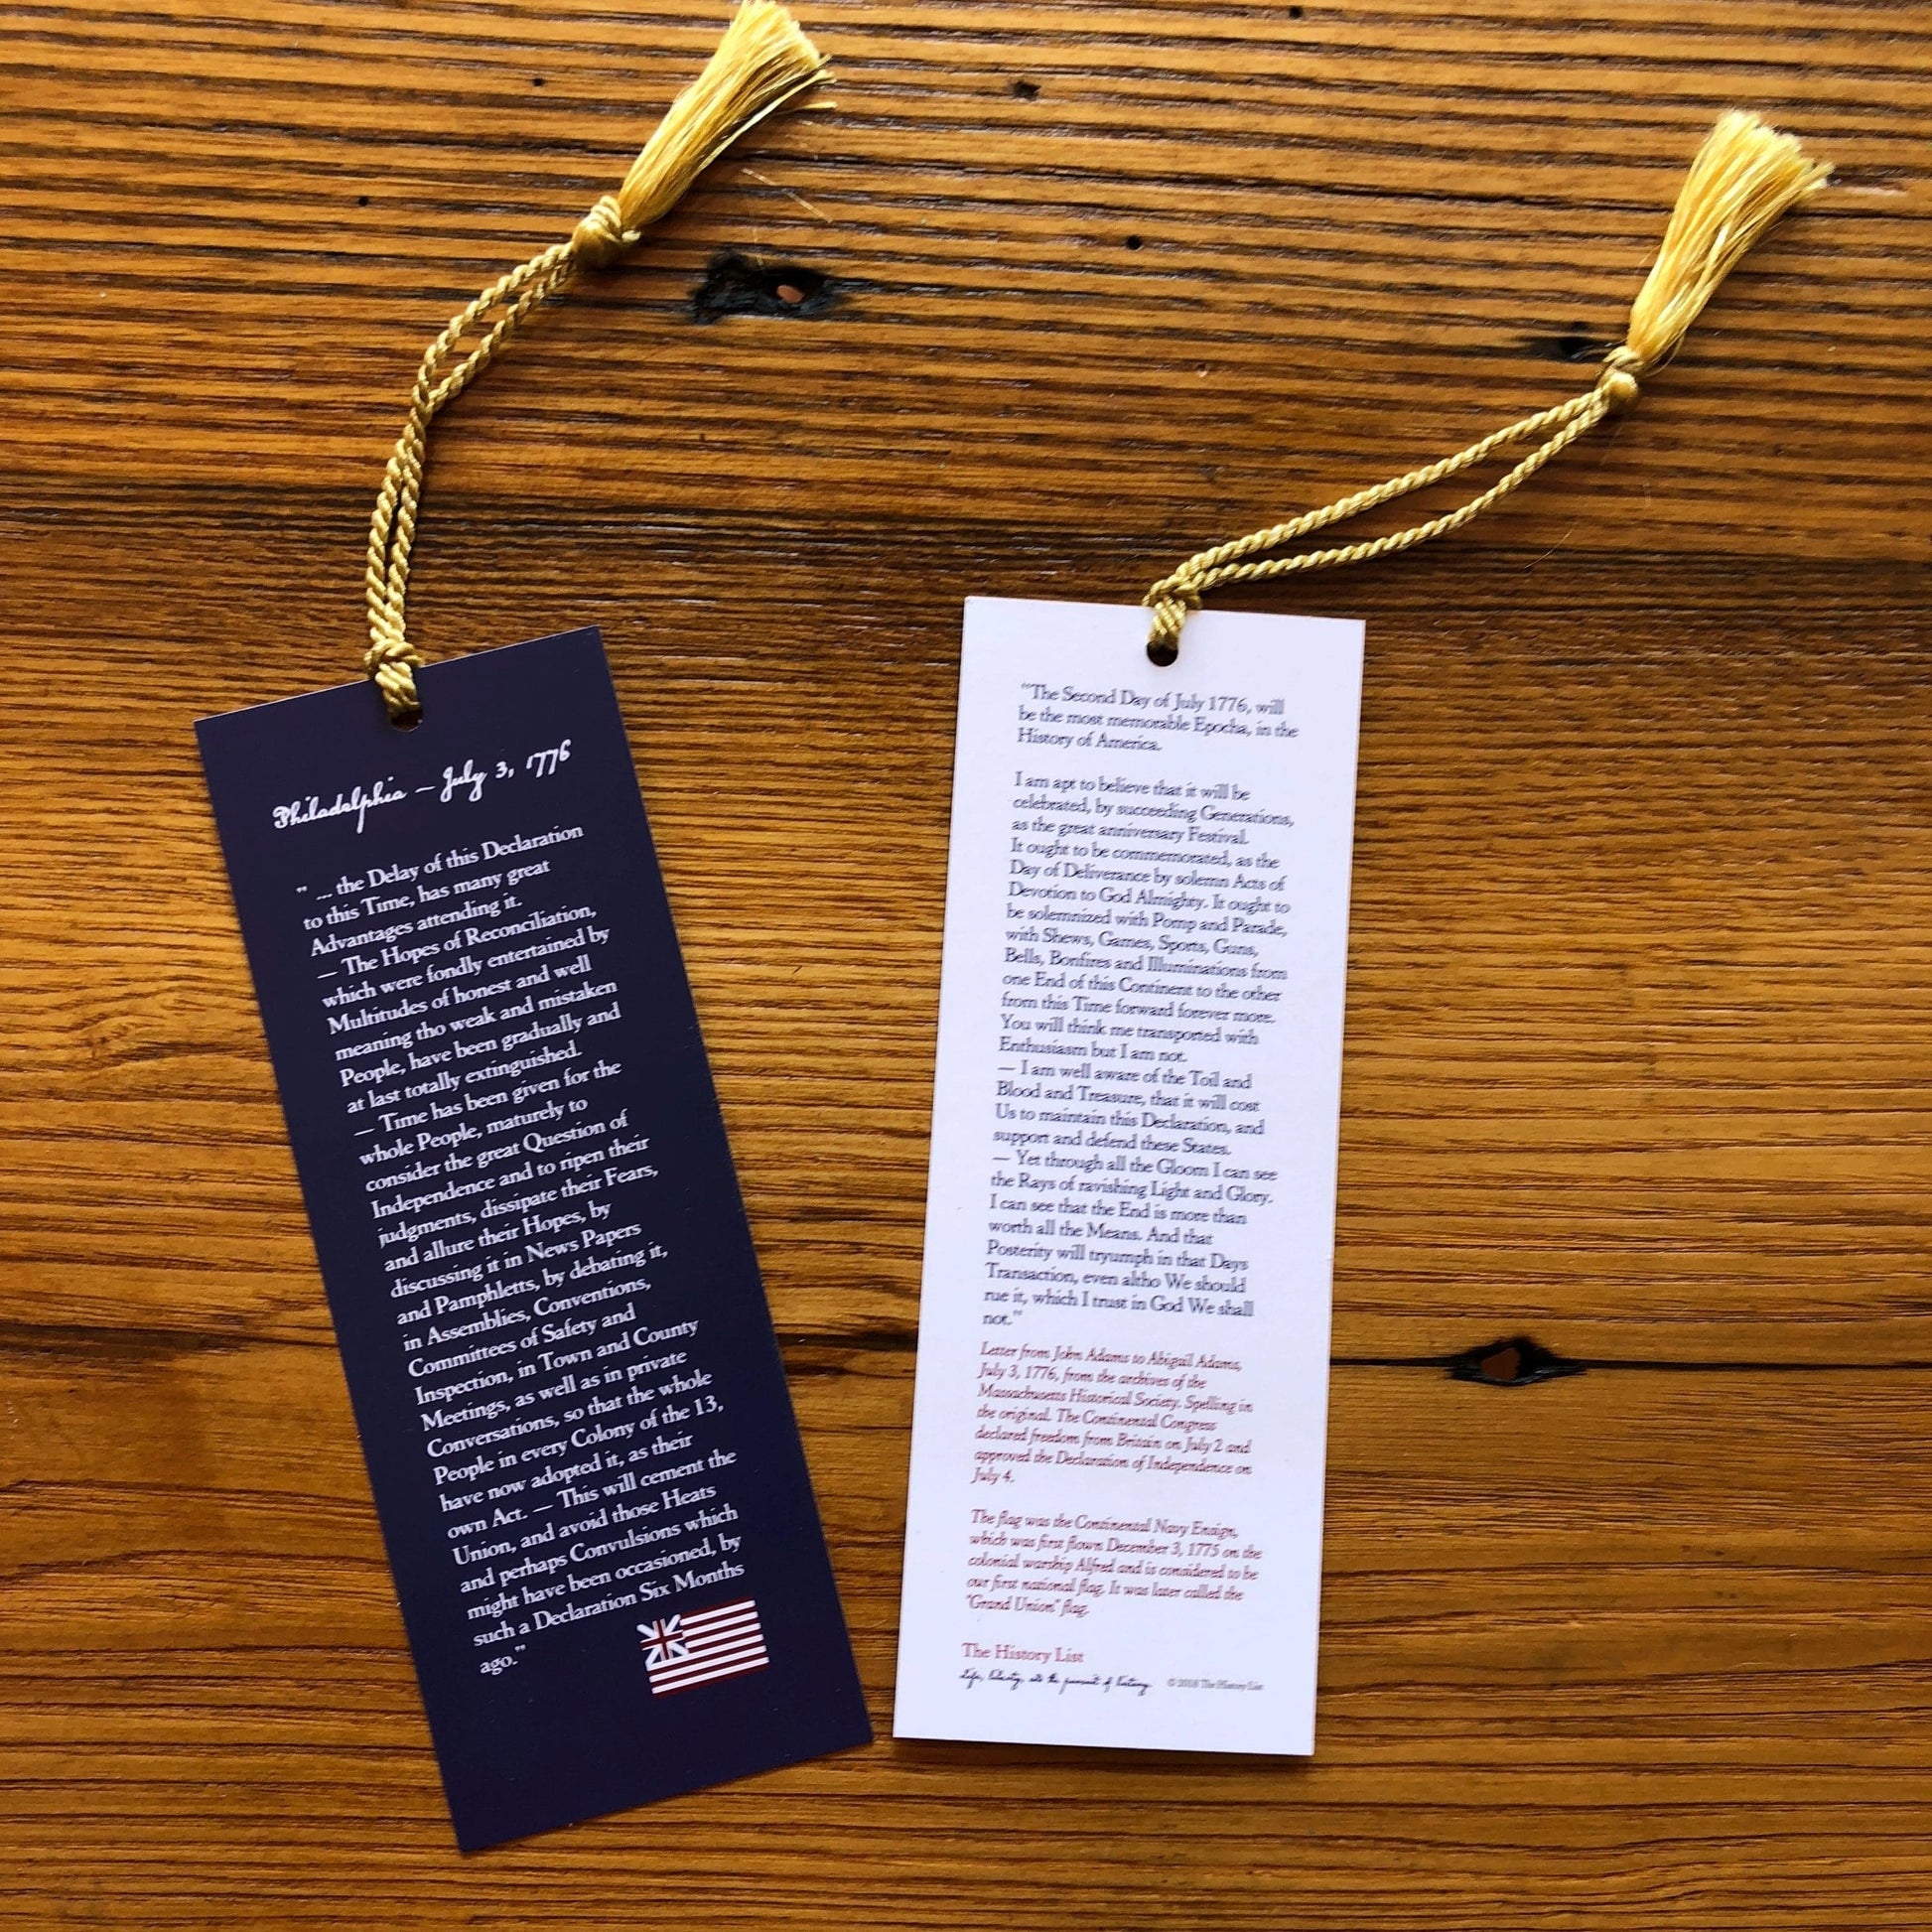 We hold these truths - July 4, 1776” Bookmark with tassel – The